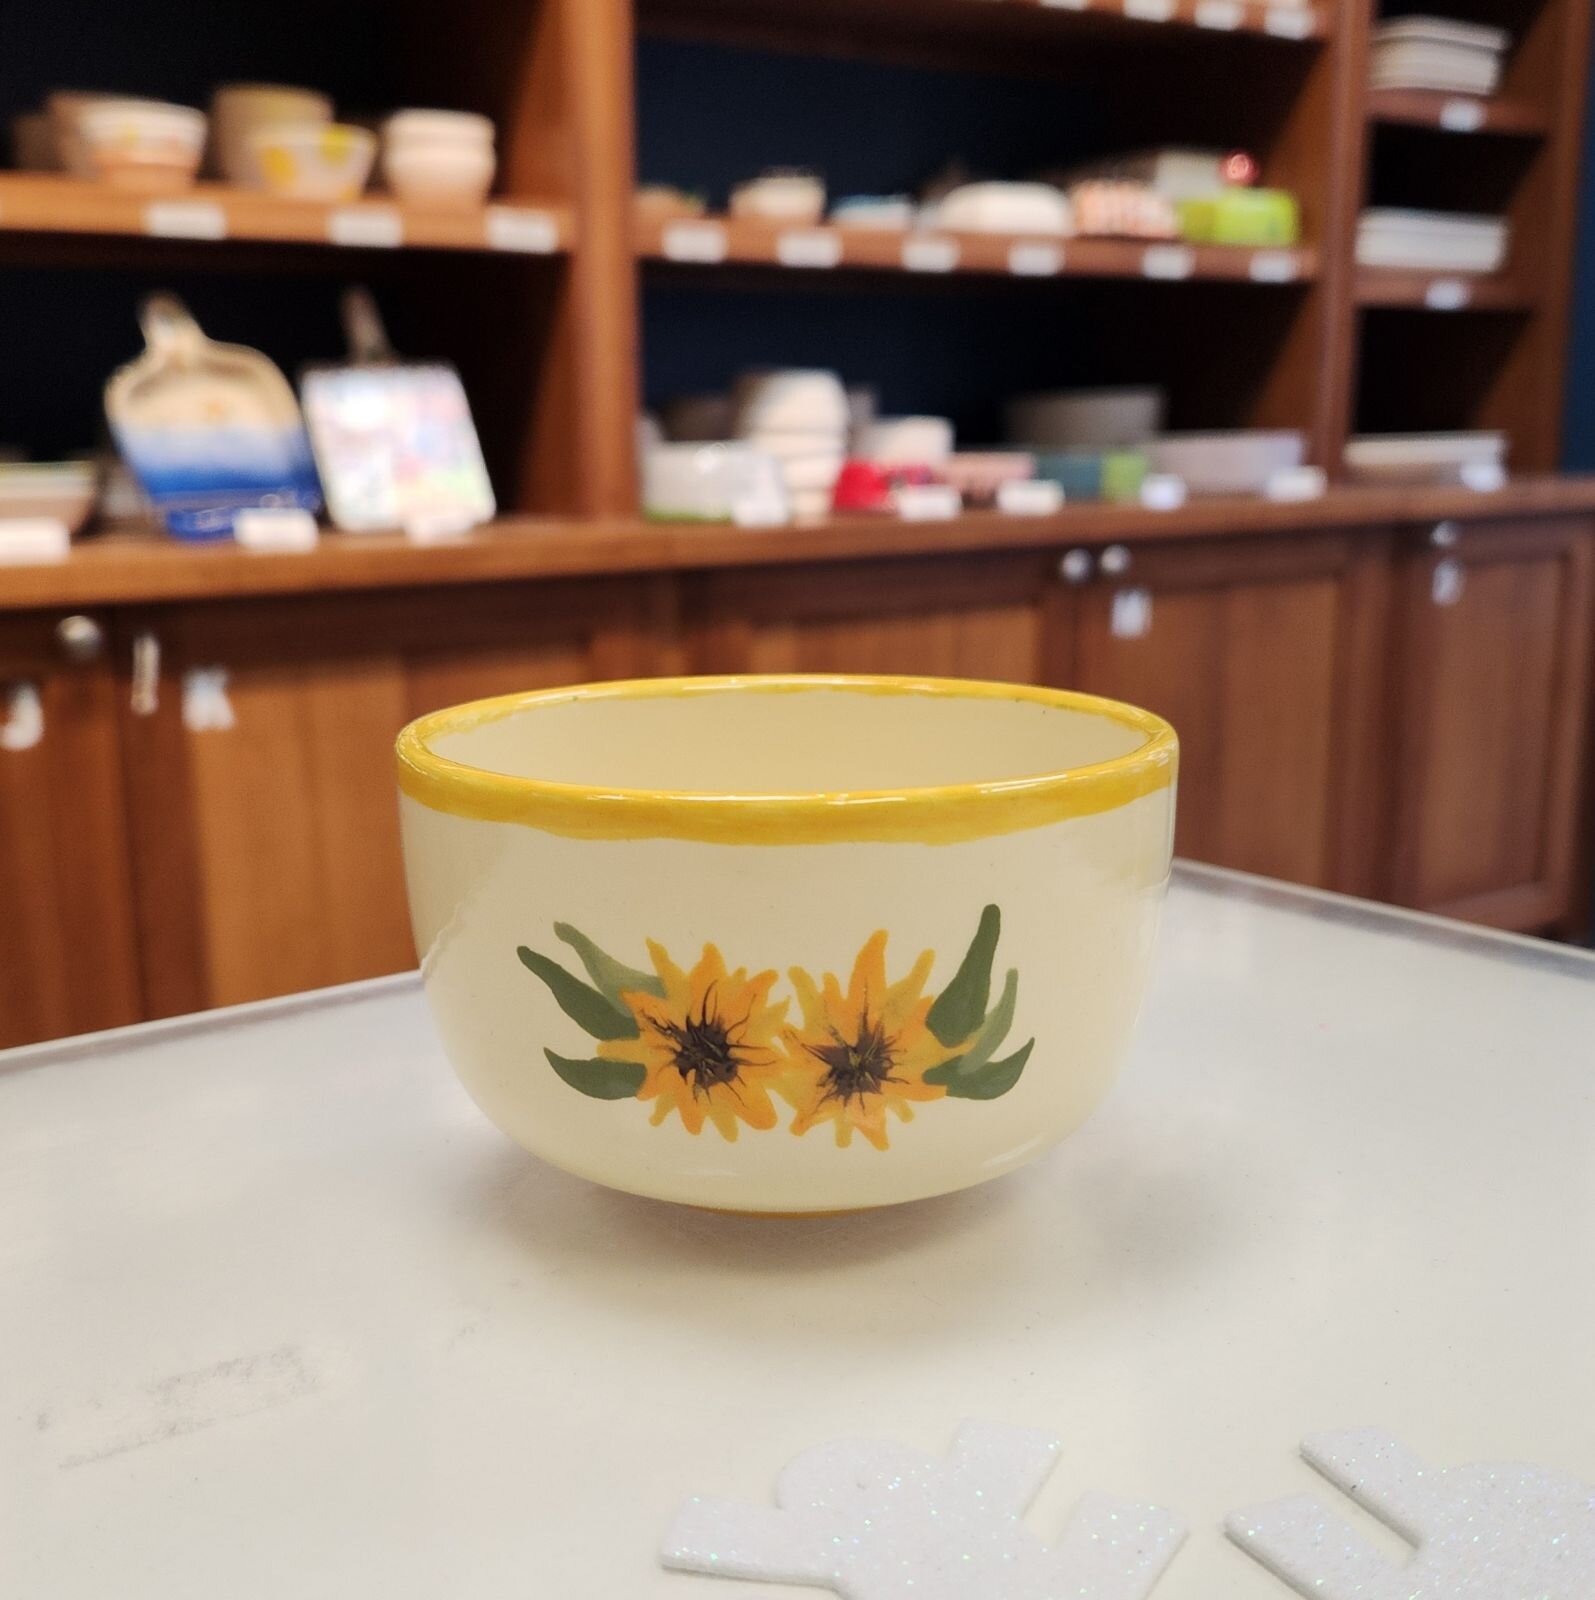 Customer Piece. Let's kickstart this sunny day with a splash of sunshine and a blooming sunflower.
https://paintawaynow.com/

#redmondtowncenter #potterypainting #pyop #buylocal #experienceredmond #becreative #shopsmall  #kidsactivities #kidspainting